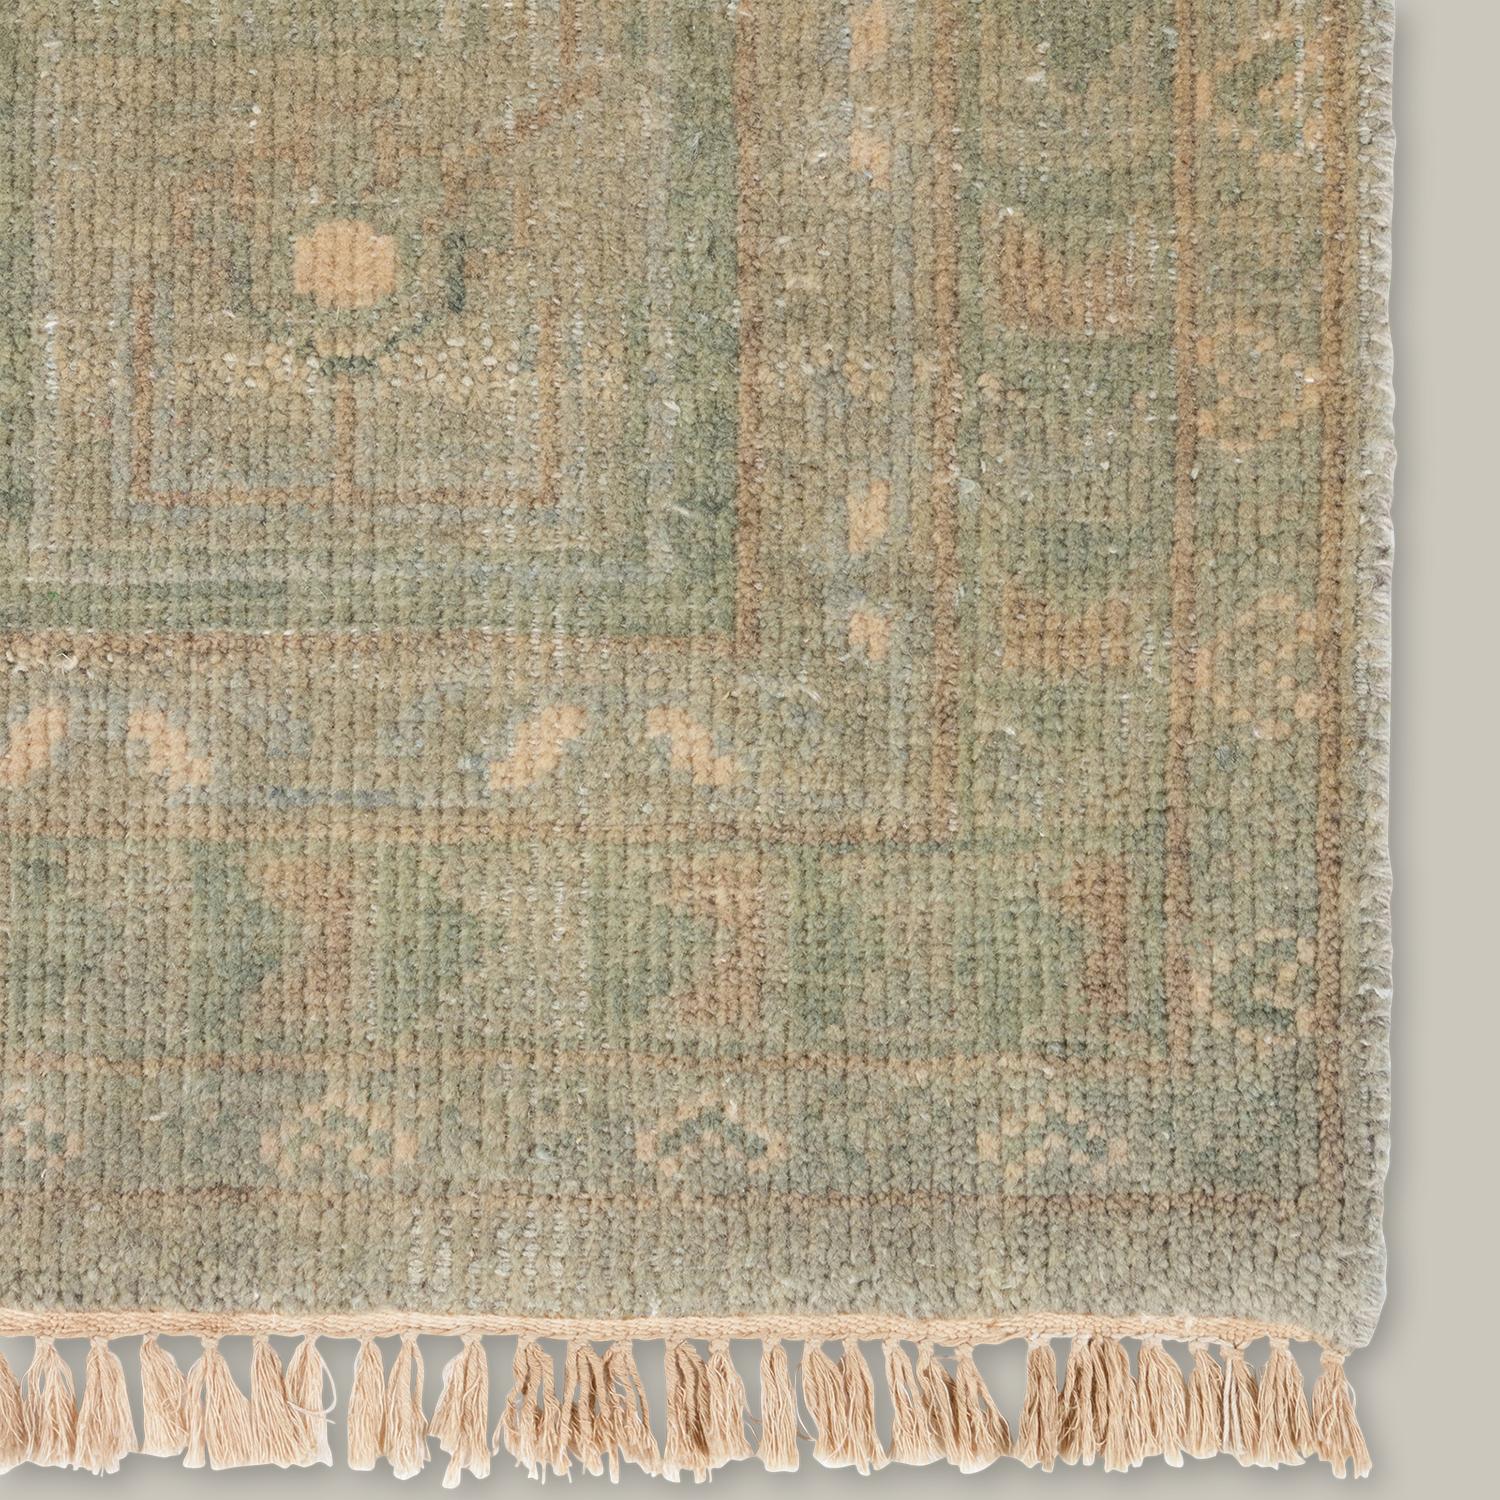 Imagine finding the most beautiful heirloom rug at your favorite Parisian flea market—the rugs in the Kouang Collection all feel that bespoke. Delicate and high-end, the dusty palettes and the faintest ghosts of pattern are pulled from multiple